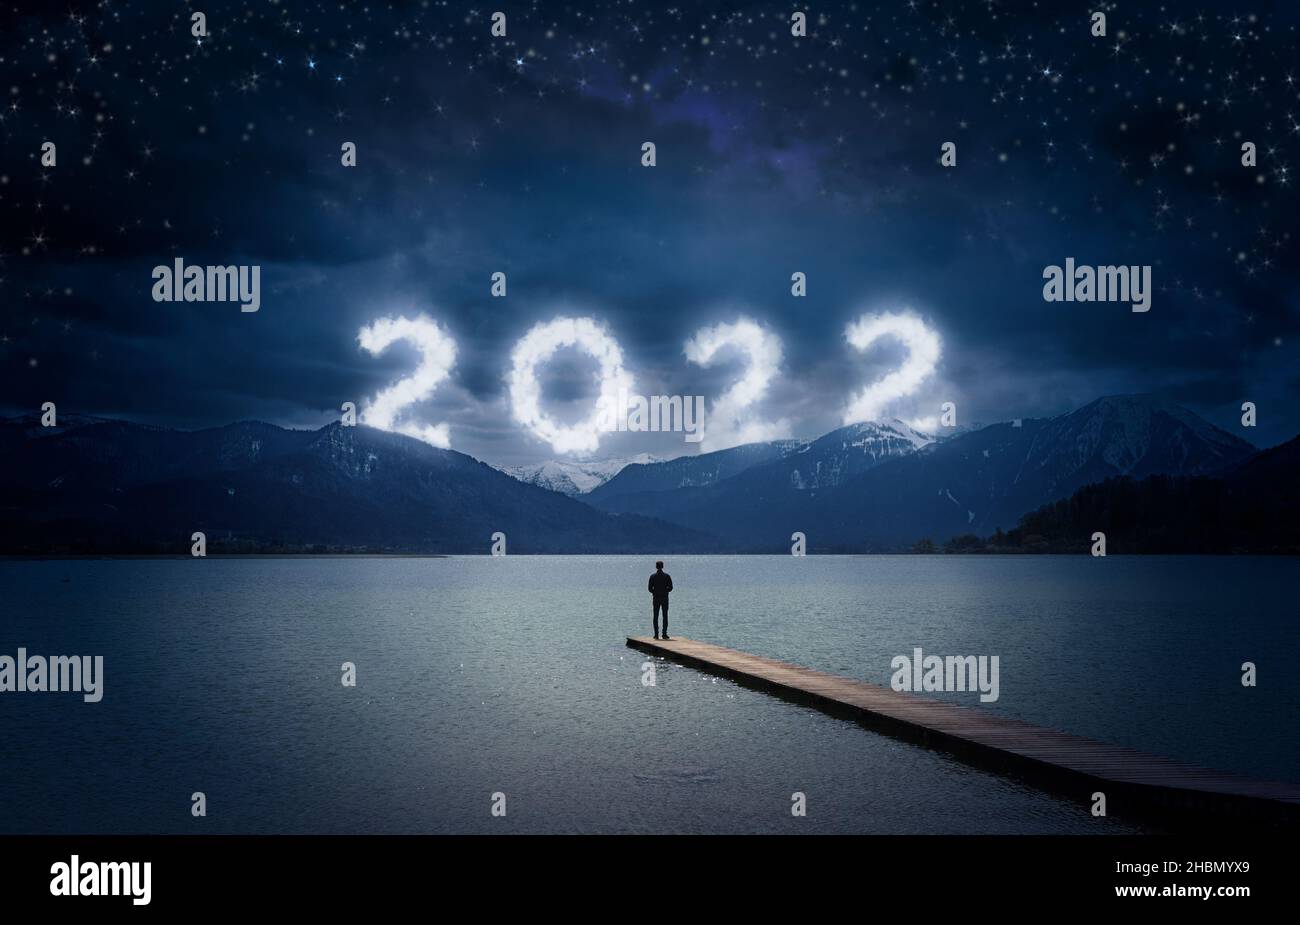 New year 2022 at night, man standing on a wooden dock on a lake and looking to the cloudy numbers in the dark sky over mountains, copy space Stock Photo